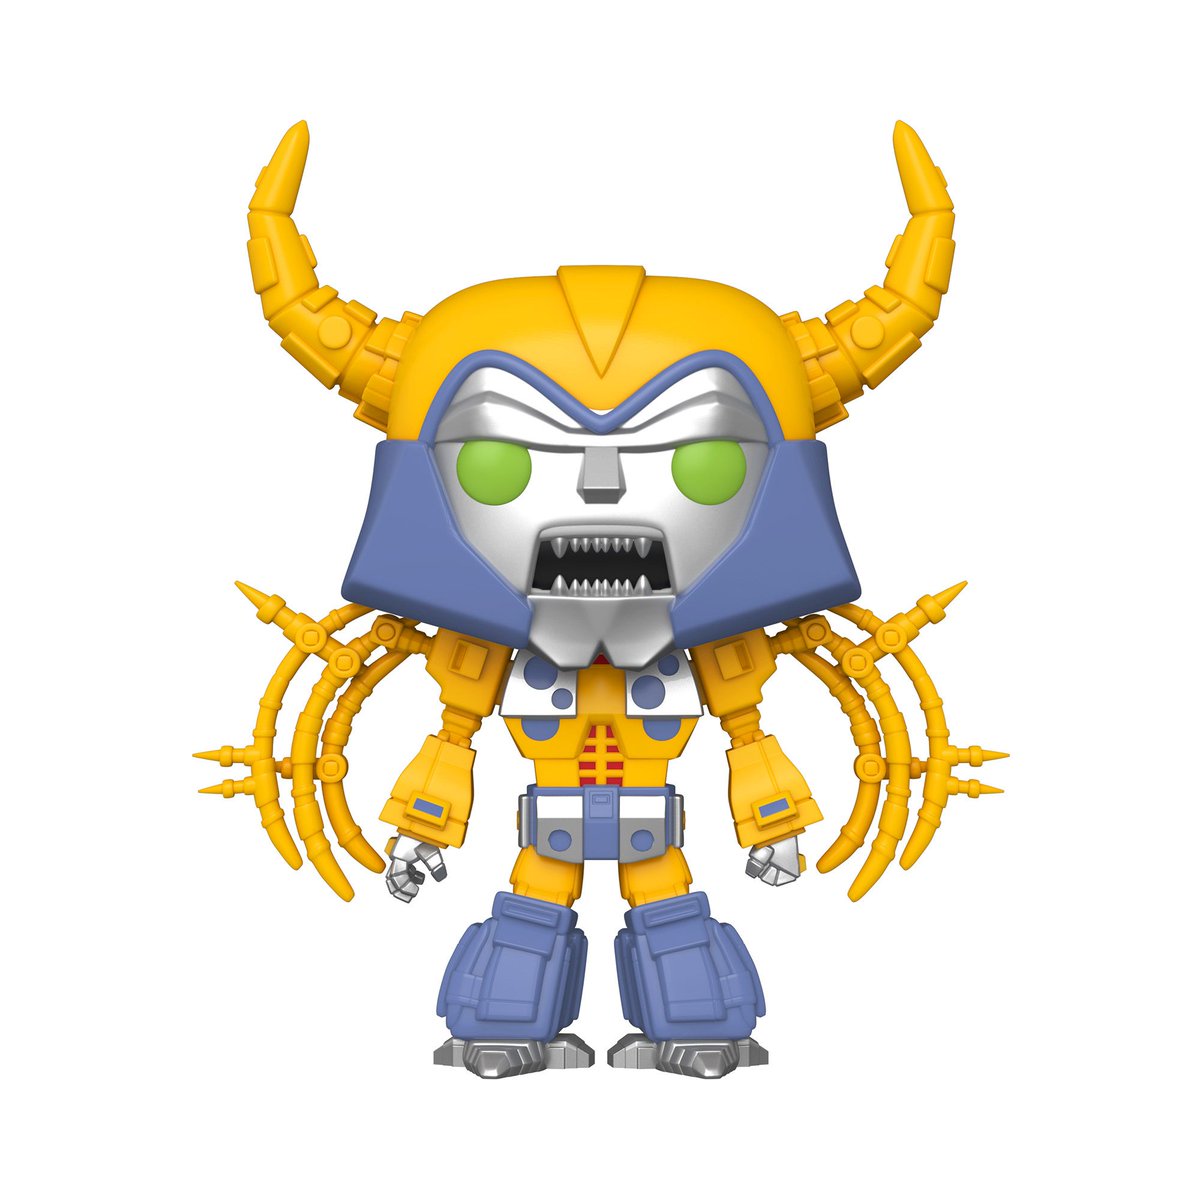 RT and follow @OriginalFunko for the chance to WIN the San Diego Comic Con exclusive Transformers: 10' Unicron POP! #Funko #FunkoPOP #Giveaway #SDCC @transformers